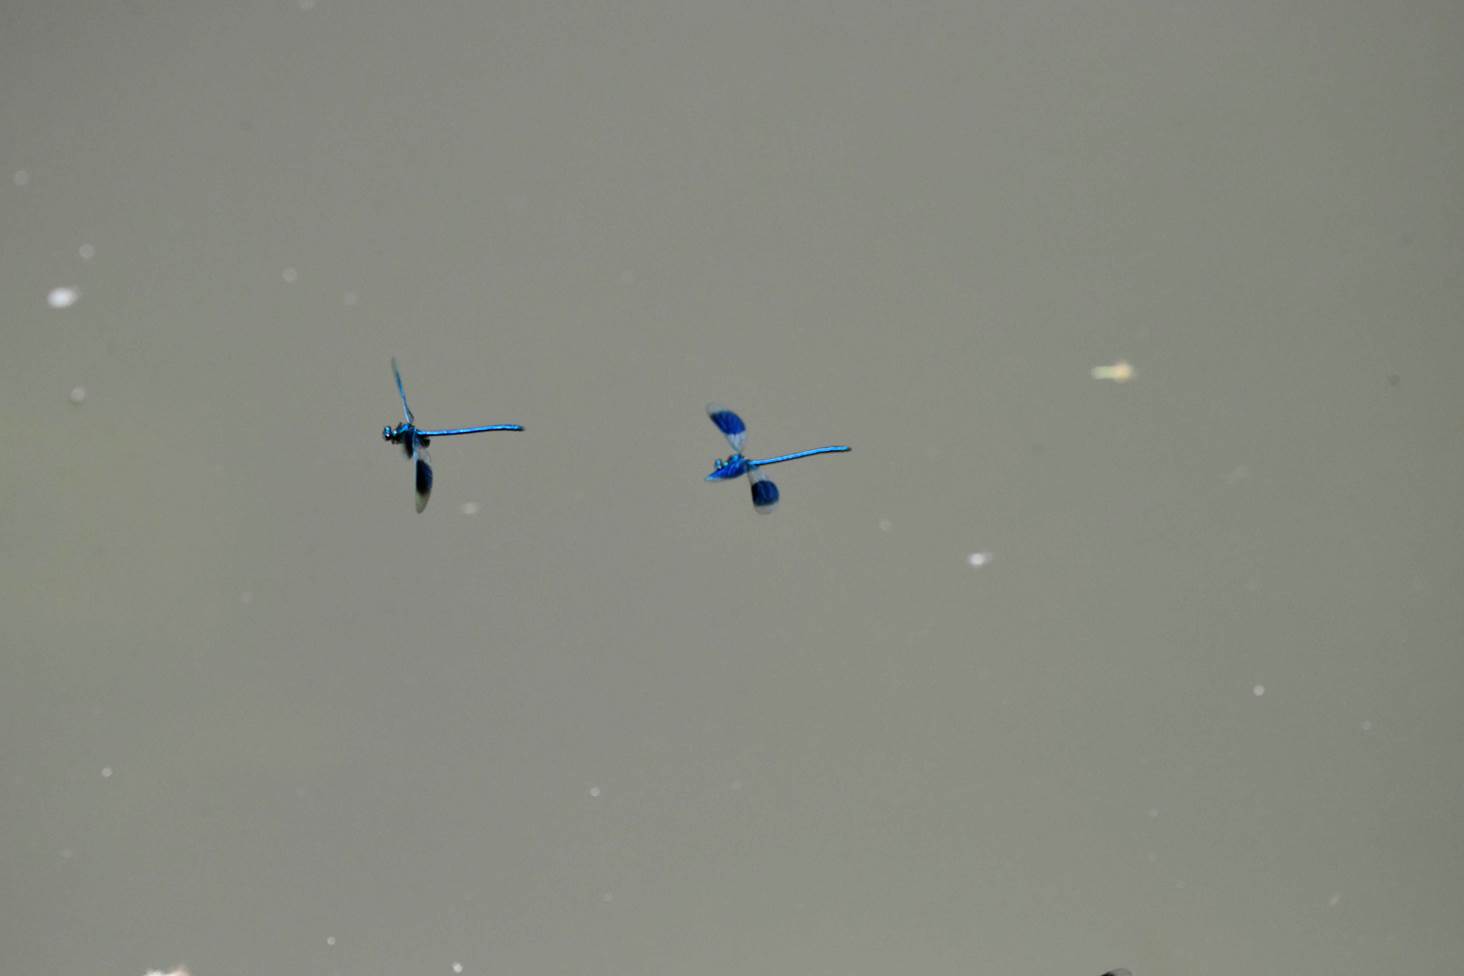 A couple of blue planes flying in the sky

Description automatically generated